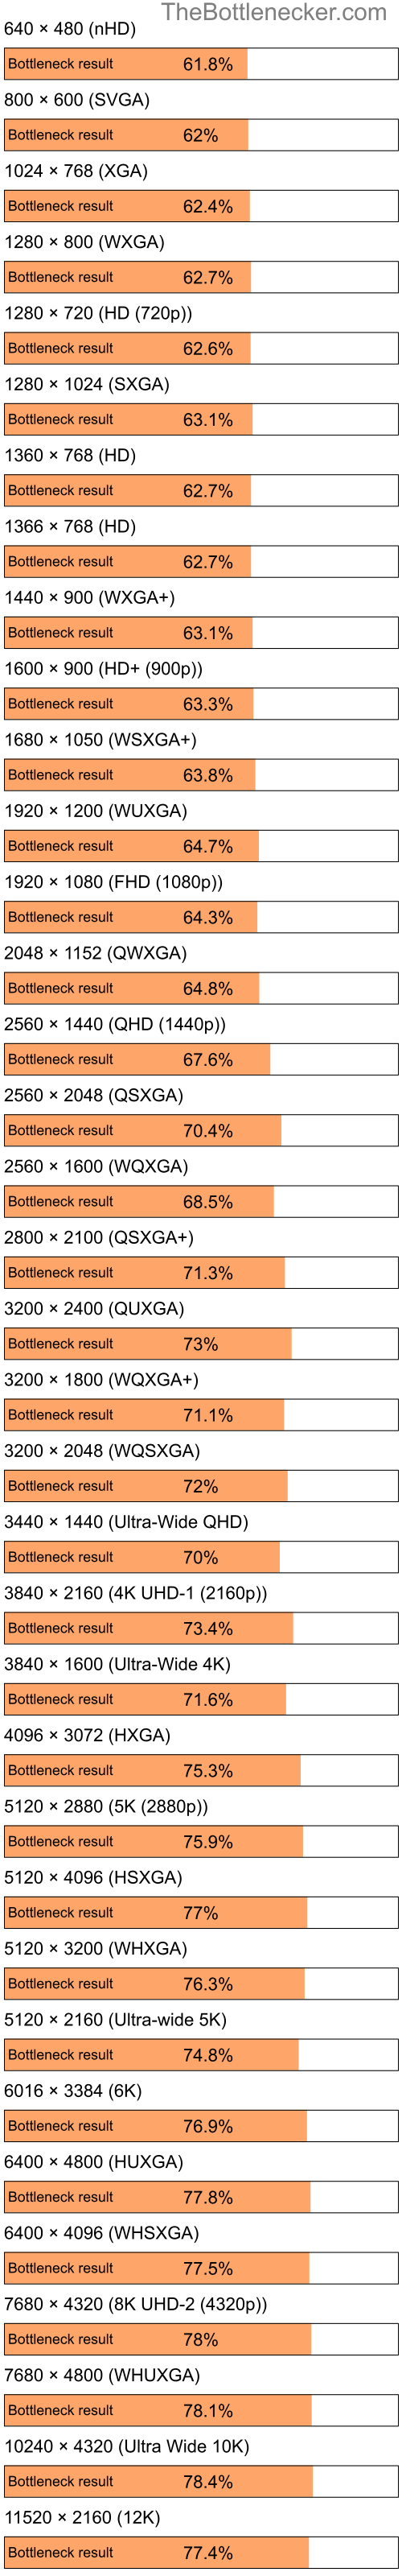 Bottleneck results by resolution for Intel Celeron M and AMD M880G with Mobility Radeon HD 4200 in General Tasks